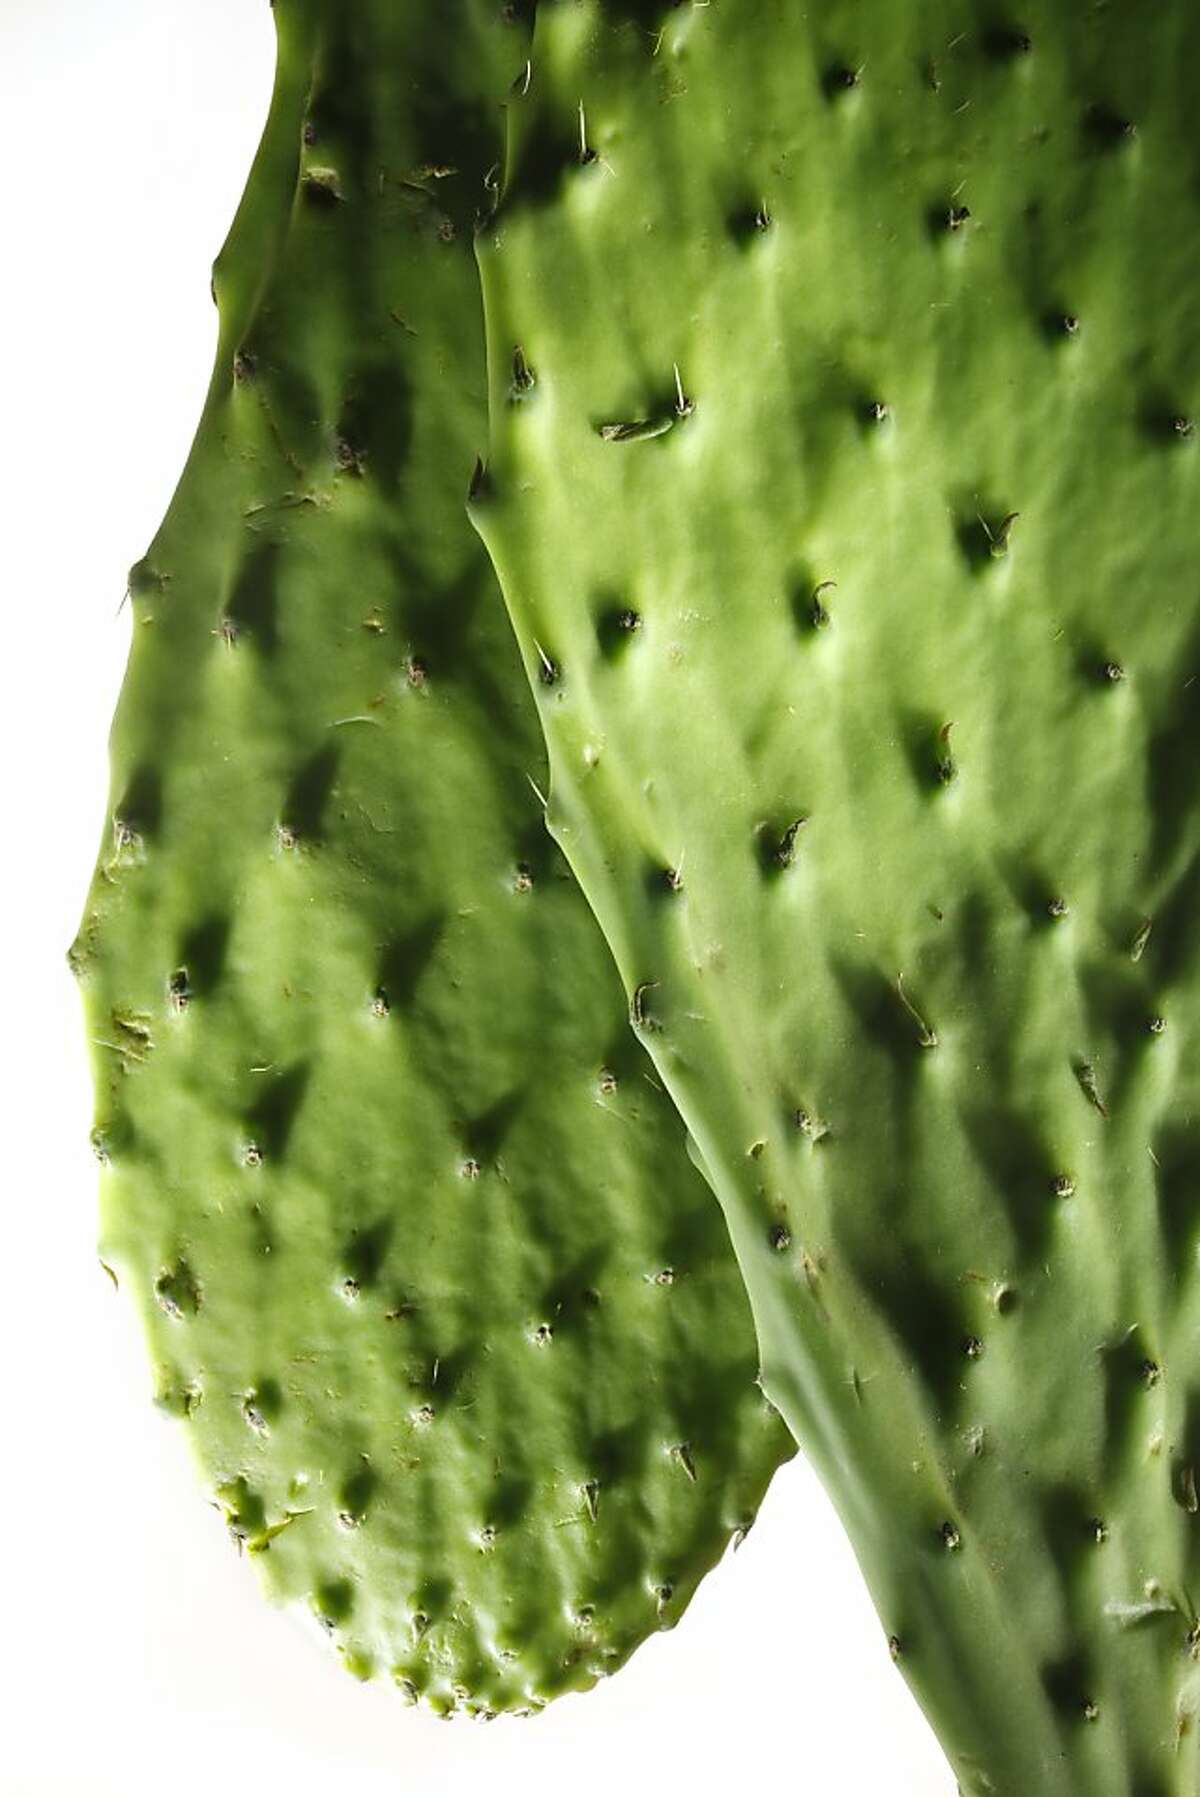 Cactus pads with spines as seen in San Francisco, California, on April 24, 2013.